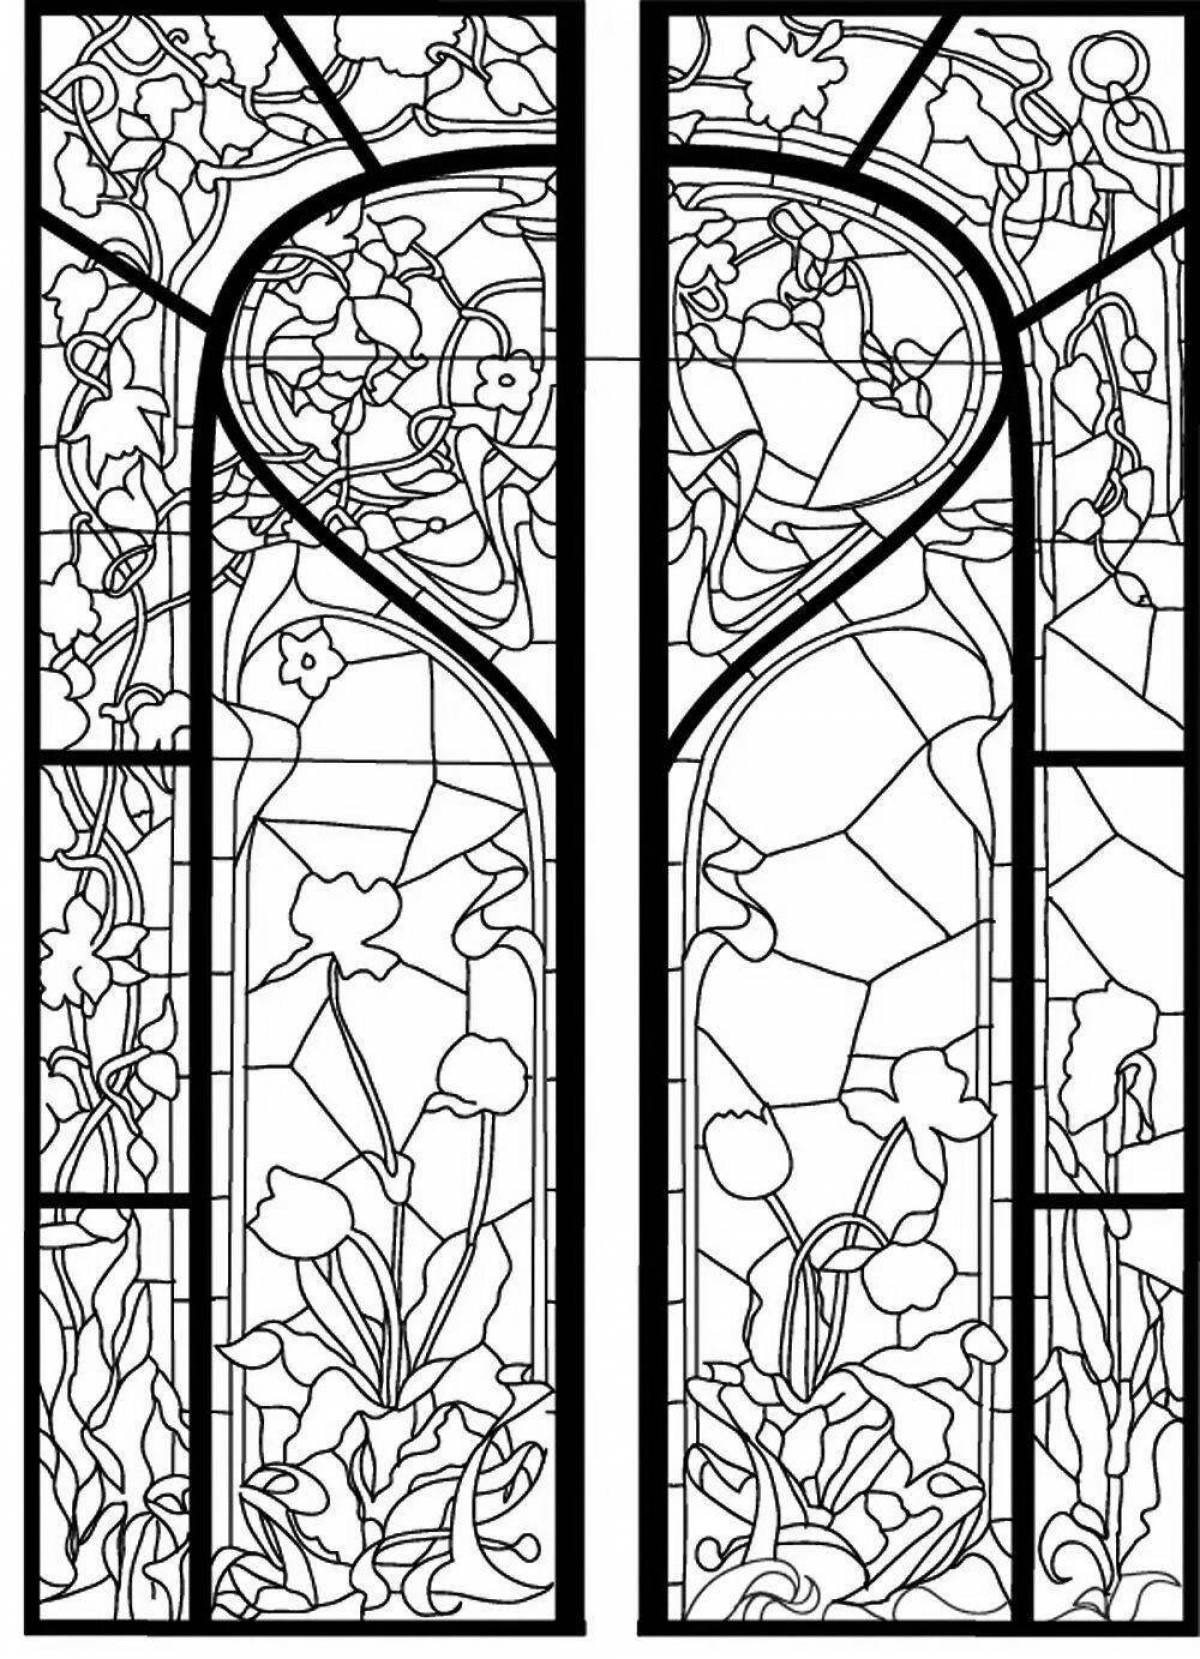 Coloring bright stained glass